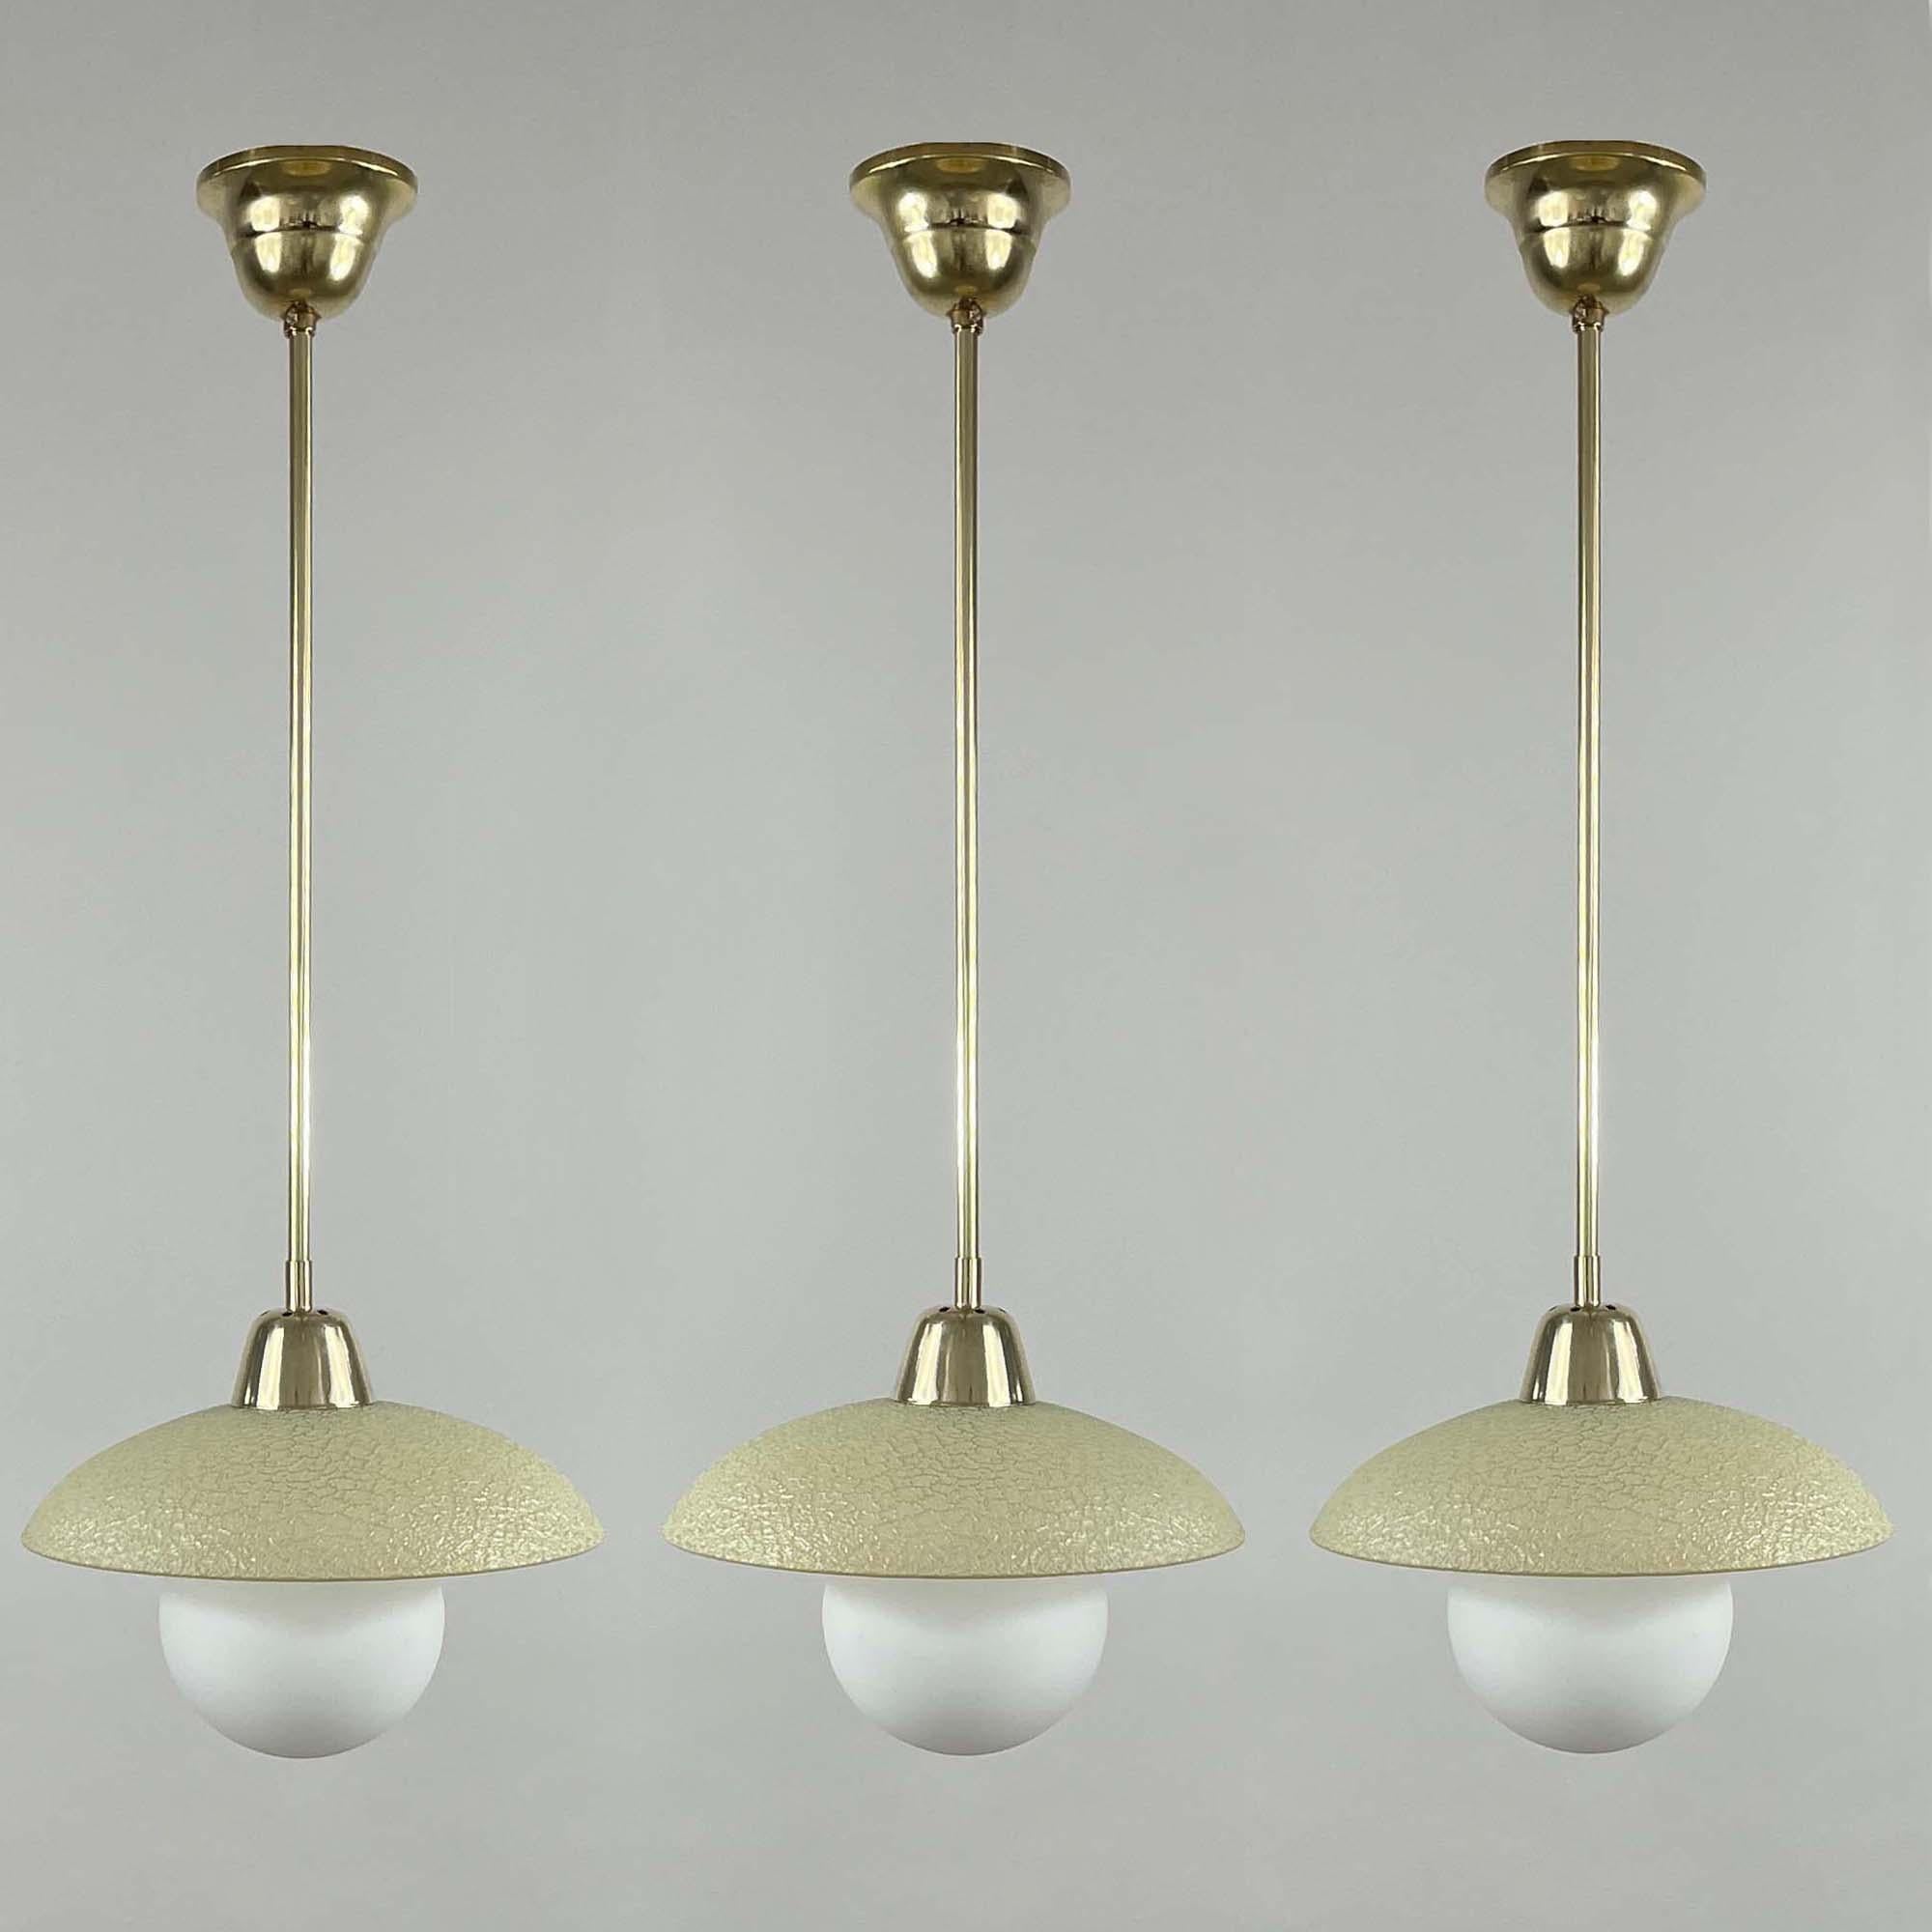 This elegant minimalist pendant was designed and manufactured in Sweden in the 1940s to 1950s. 

The light features a round cream colored crackle glass textured lampshade and brass hardware. It requires one E27 bulb and has been rewired for use in